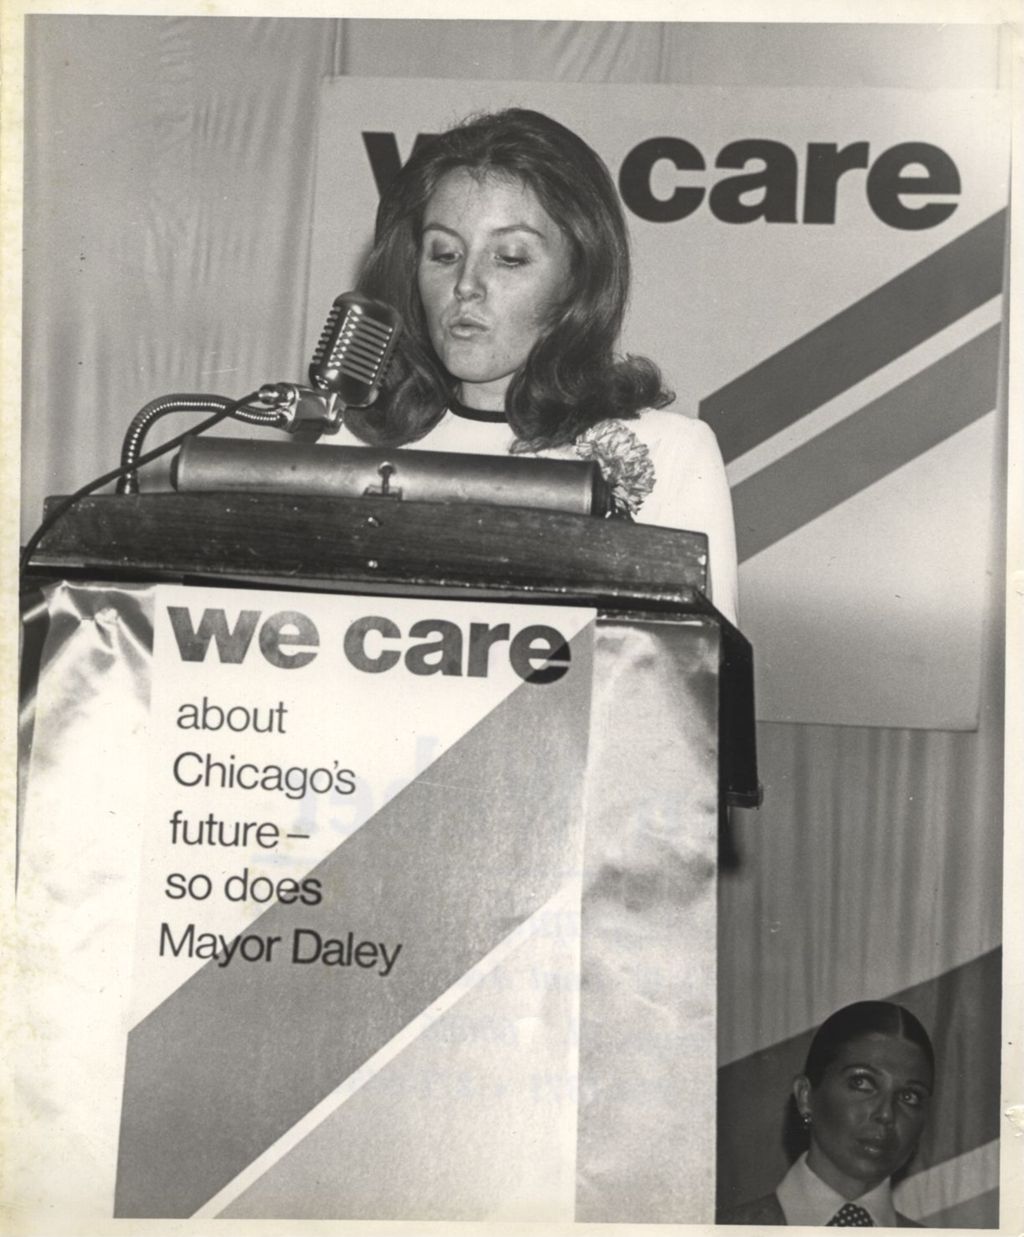 Miniature of Woman speaking at a podium at a "We Care" event